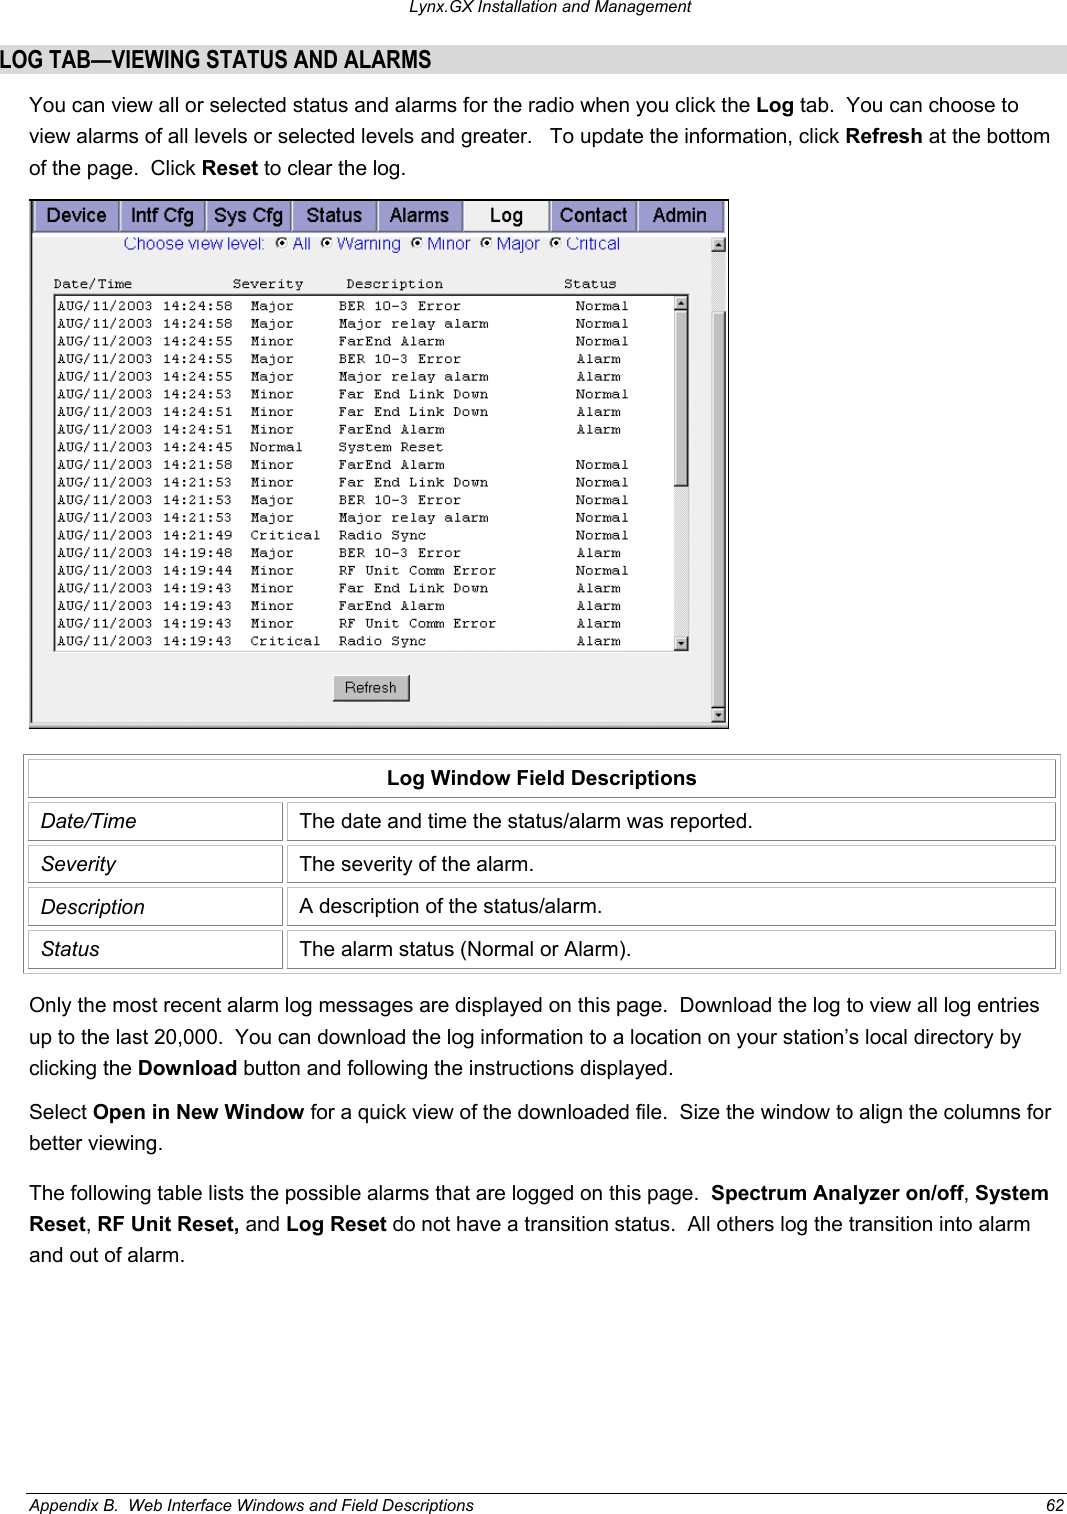 Lynx.GX Installation and Management LOG TAB—VIEWING STATUS AND ALARMS You can view all or selected status and alarms for the radio when you click the Log tab.  You can choose to view alarms of all levels or selected levels and greater.   To update the information, click Refresh at the bottom of the page.  Click Reset to clear the log.    Log Window Field Descriptions Date/Time  The date and time the status/alarm was reported. Severity  The severity of the alarm. Description  A description of the status/alarm. Status  The alarm status (Normal or Alarm). Only the most recent alarm log messages are displayed on this page.  Download the log to view all log entries up to the last 20,000.  You can download the log information to a location on your station’s local directory by clicking the Download button and following the instructions displayed. Select Open in New Window for a quick view of the downloaded file.  Size the window to align the columns for better viewing. The following table lists the possible alarms that are logged on this page.  Spectrum Analyzer on/off, System Reset, RF Unit Reset, and Log Reset do not have a transition status.  All others log the transition into alarm and out of alarm. Appendix B.  Web Interface Windows and Field Descriptions  62 